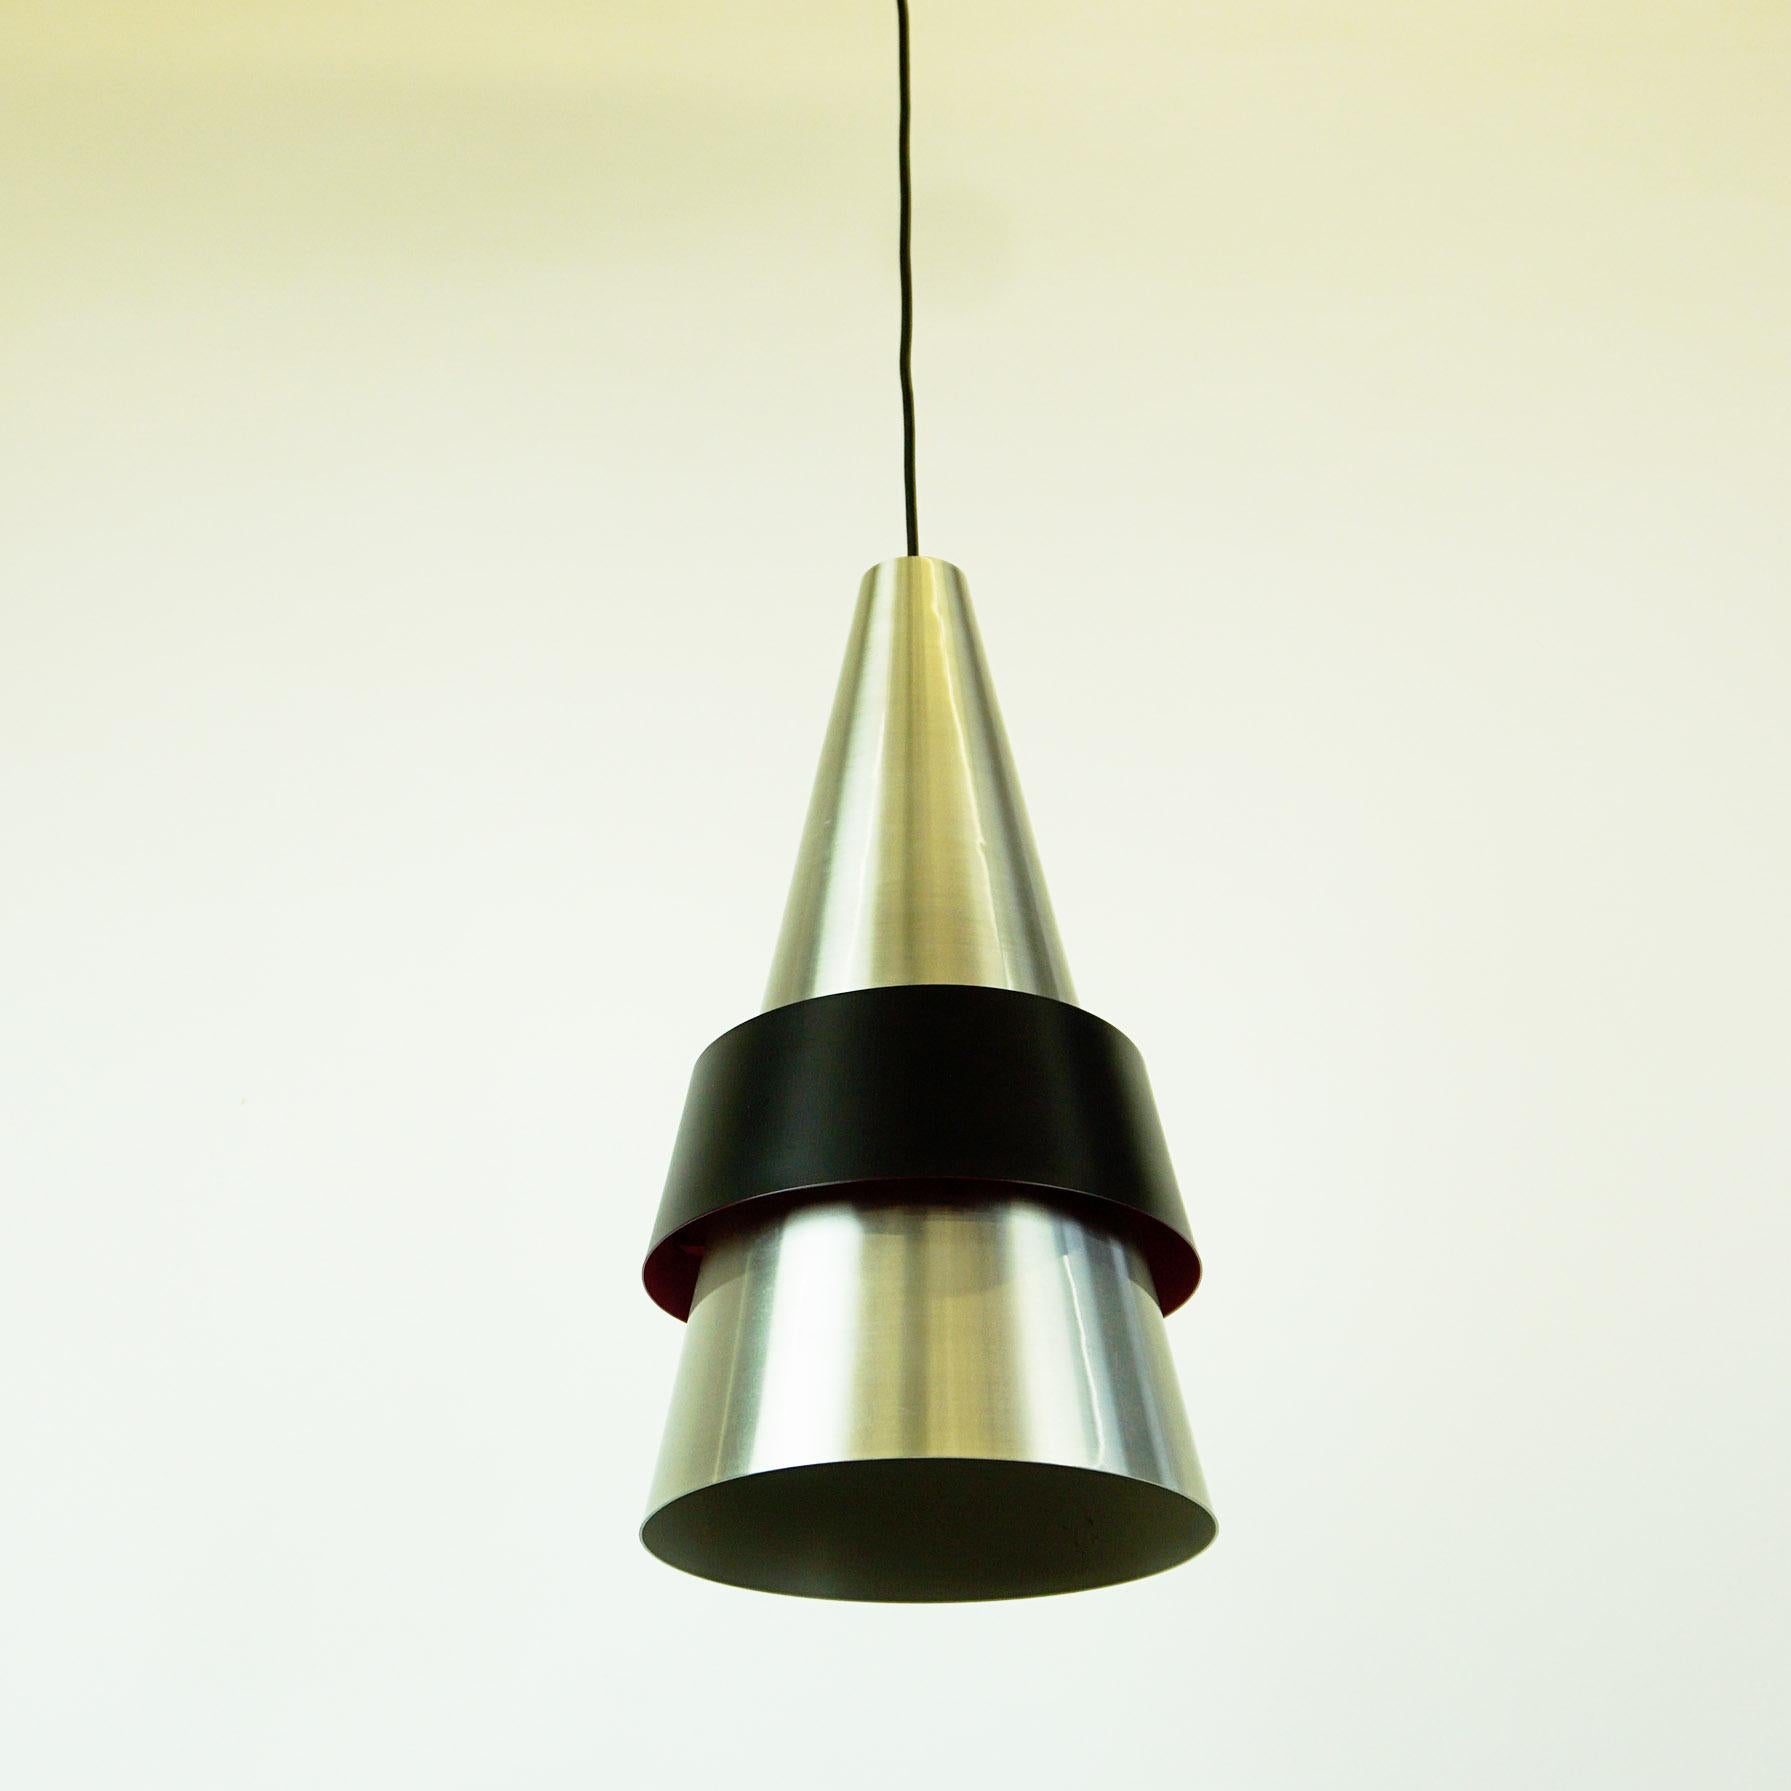 Large conical silver and black pendant lamps made from brushed aluminium set with a matte black shade. The Model is called Corona and was designed by Jo Hammerborg and manufactured by Fog and Morup in the early 1960s.
Both feature a pink colored